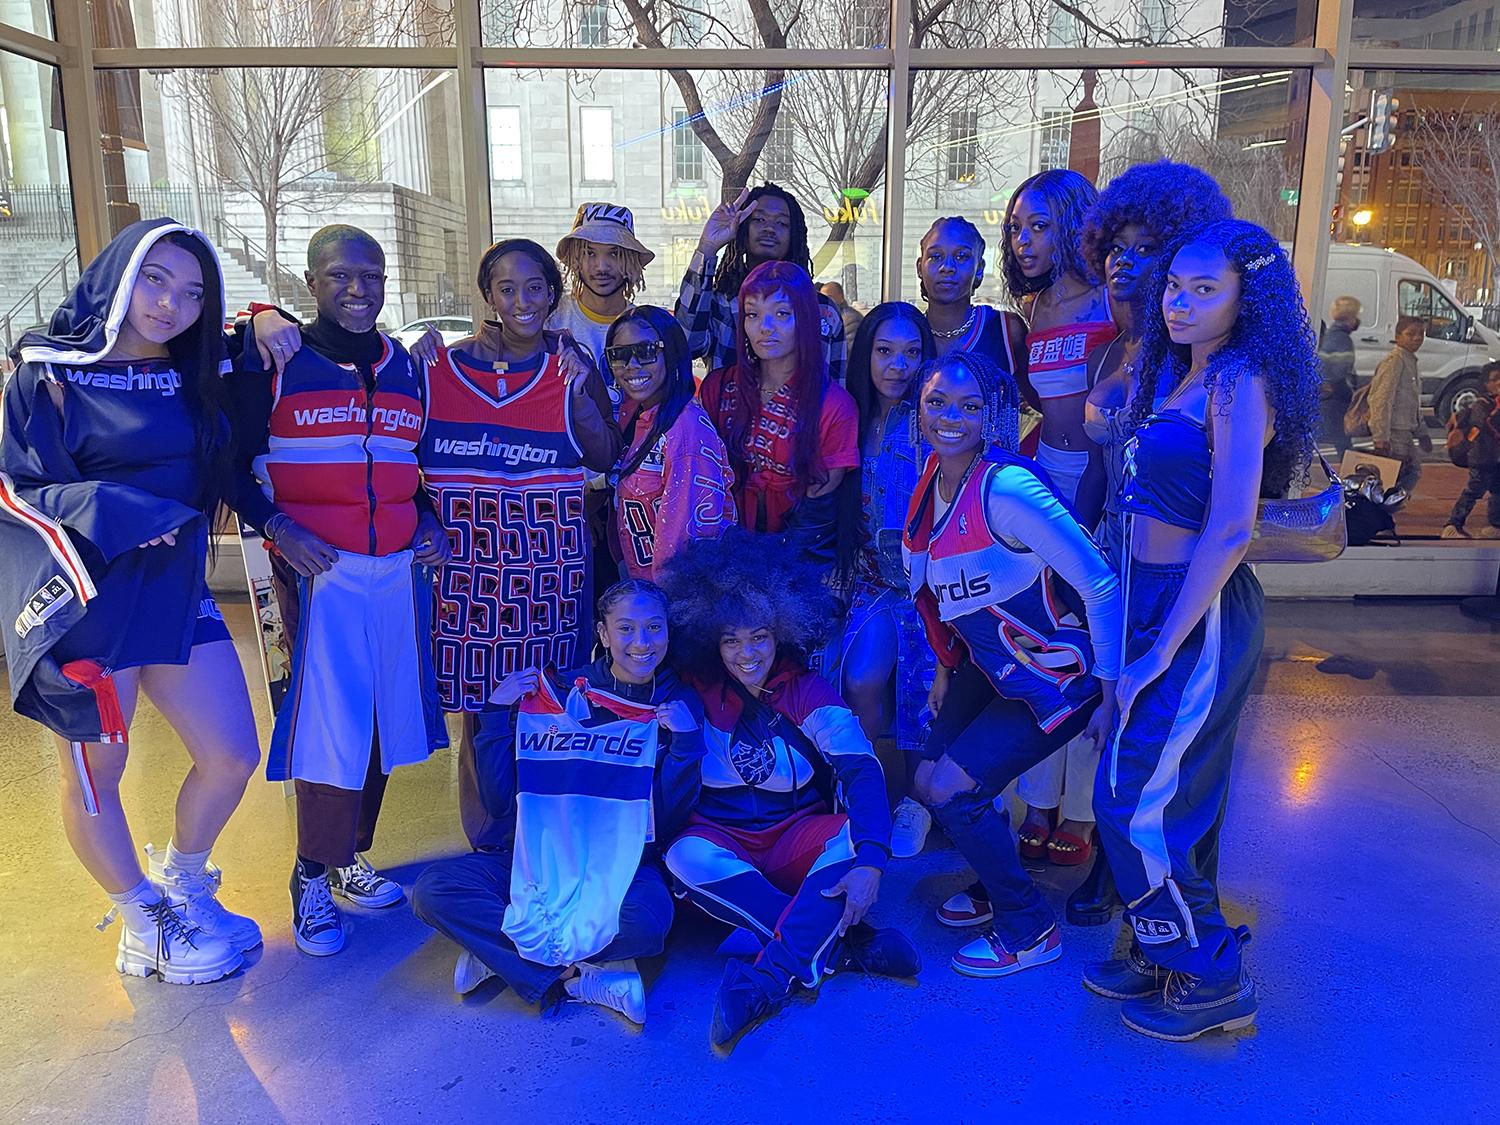 Prof. Taylor with her class on the Washington Wizards remix project